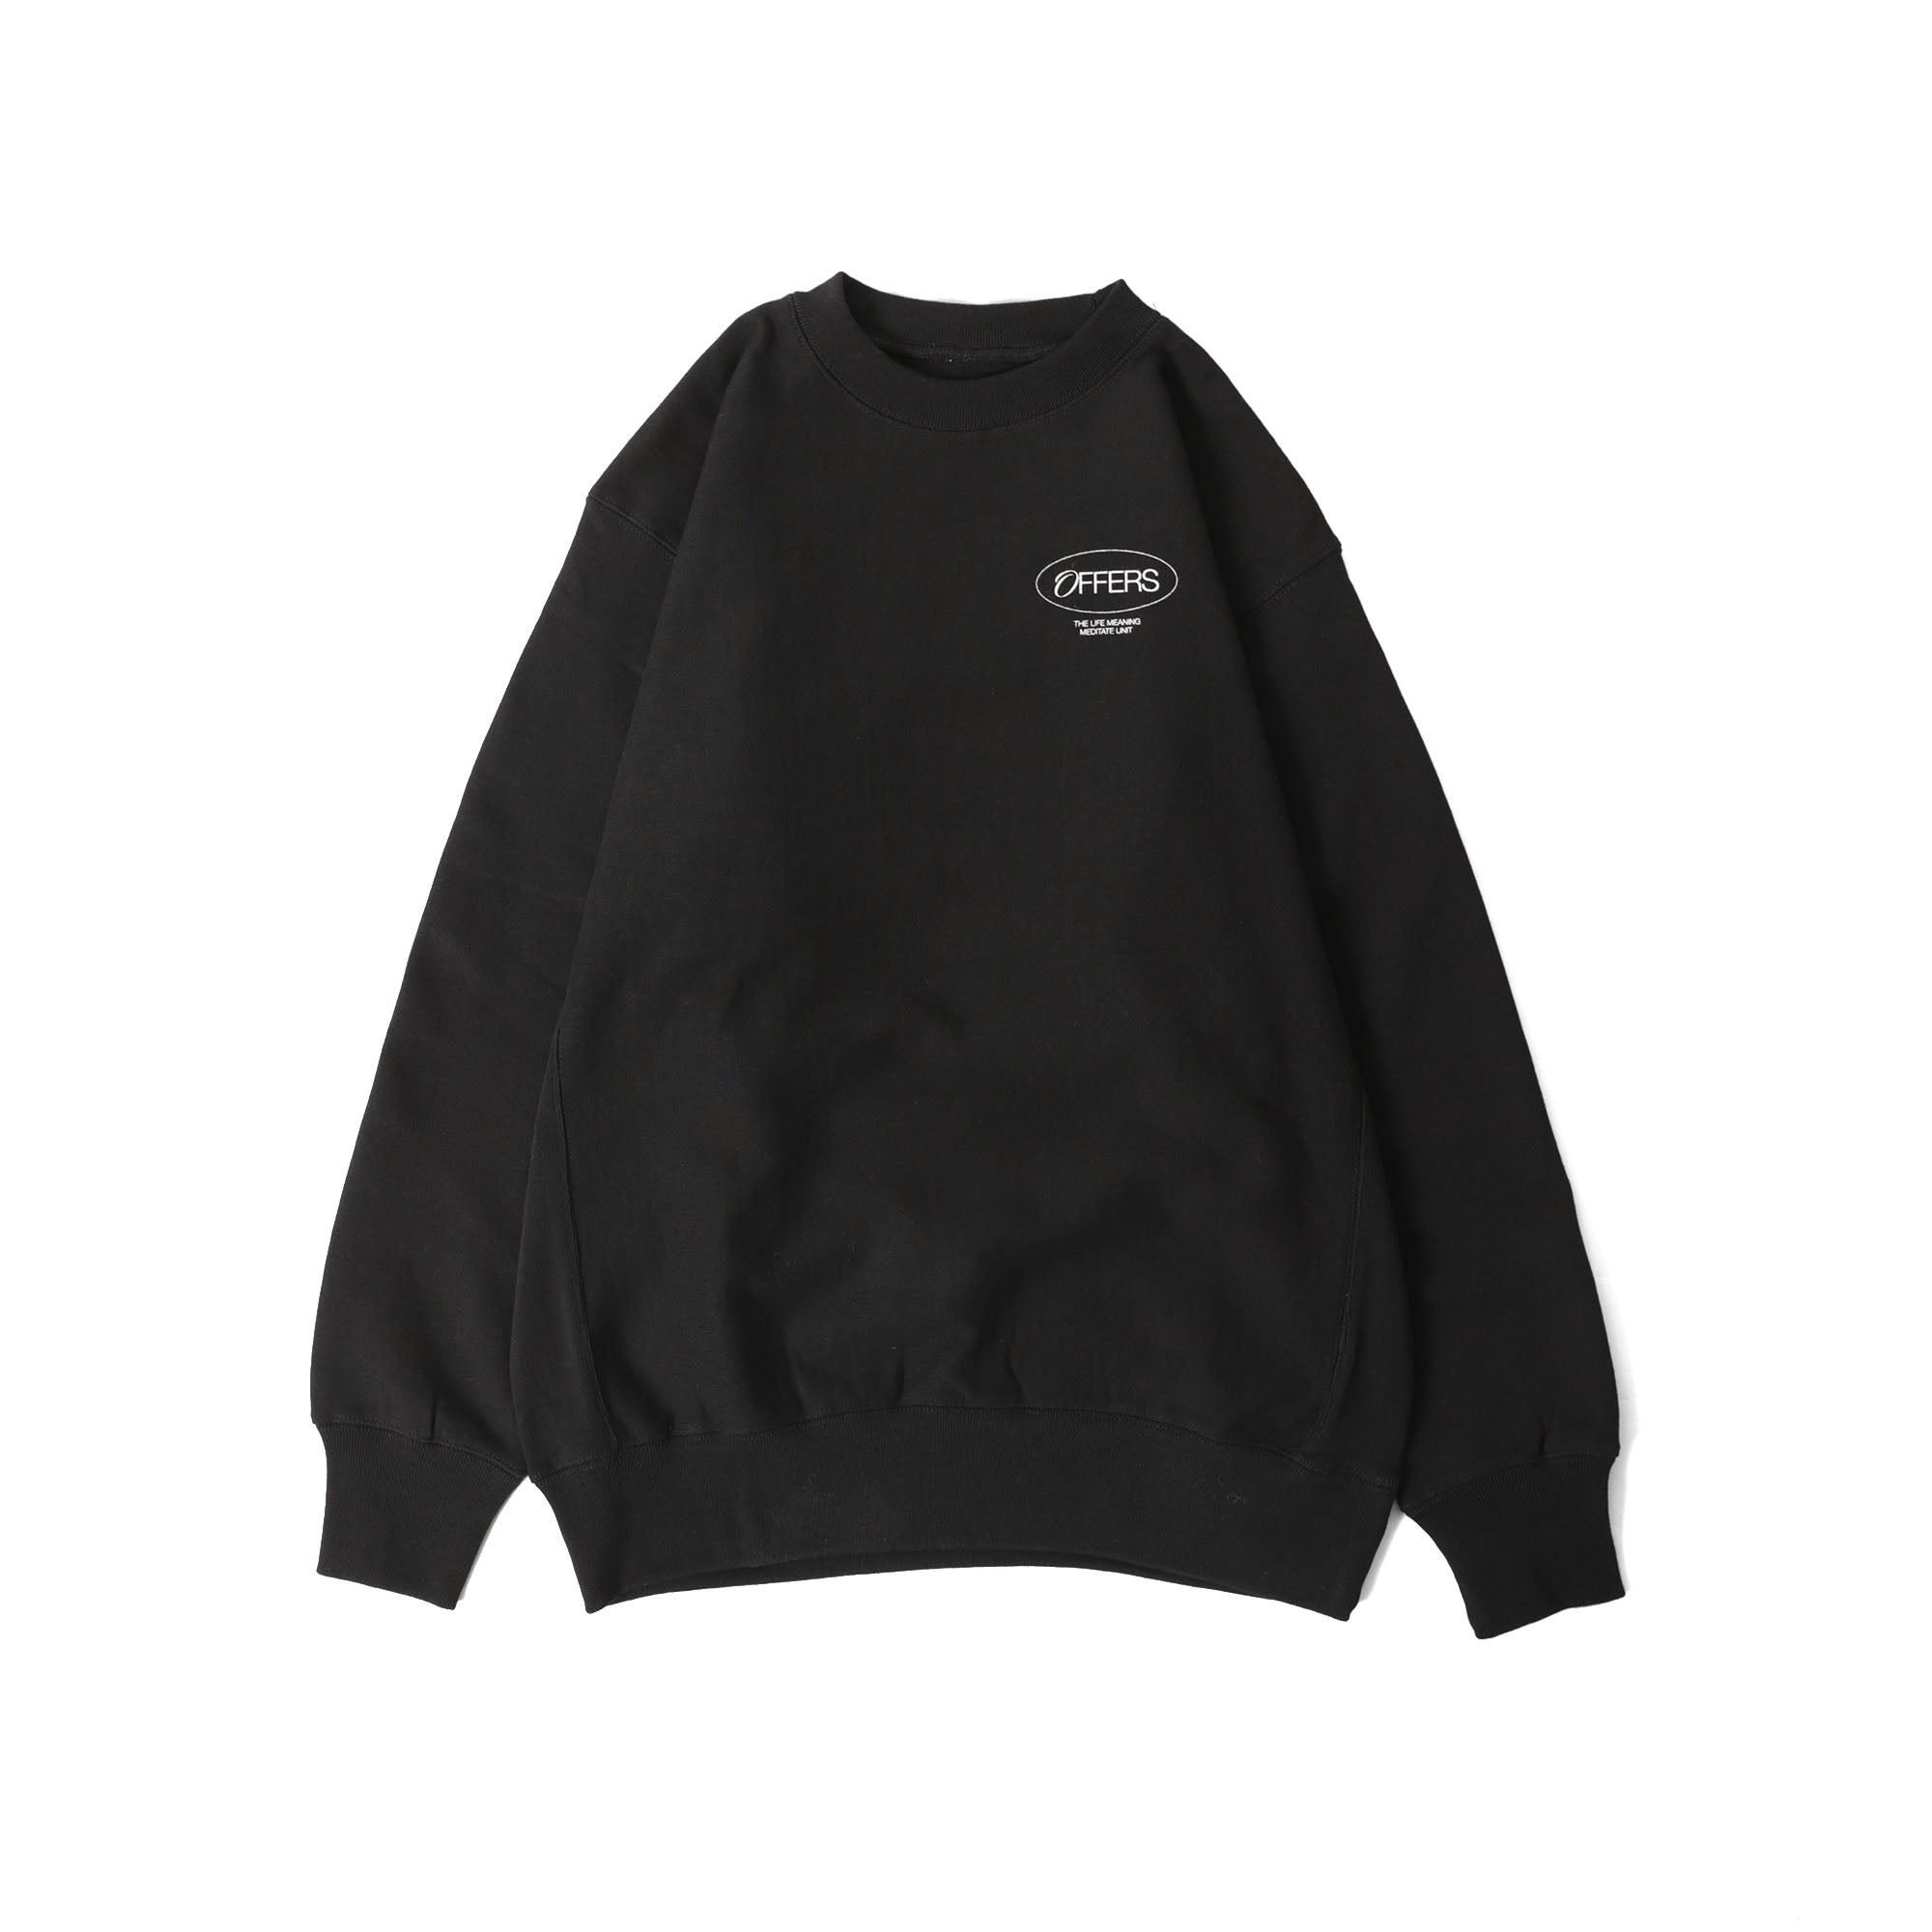 the best offers "LIFE MEANING" 12.0oz C/N SWEATSHIRT